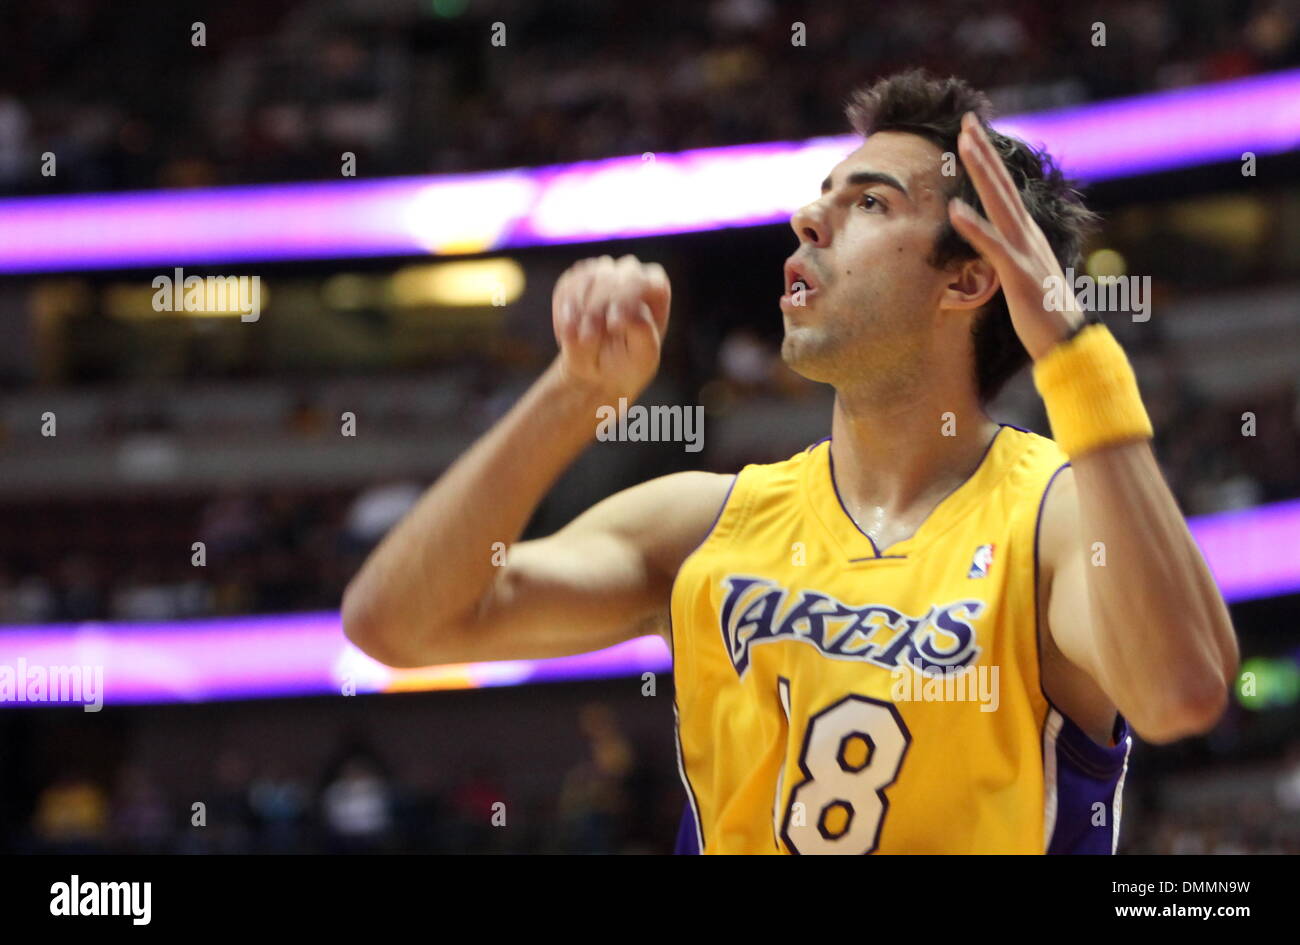 Oct 22, 2009 - Anaheim, California, USA - Los Angeles Lakers' SASHA VUJACIC #18 is pictured during a game against the Denver Nuggets at the Honda Center.   (Credit Image: © Mark Samala/ZUMA Press) Stock Photo